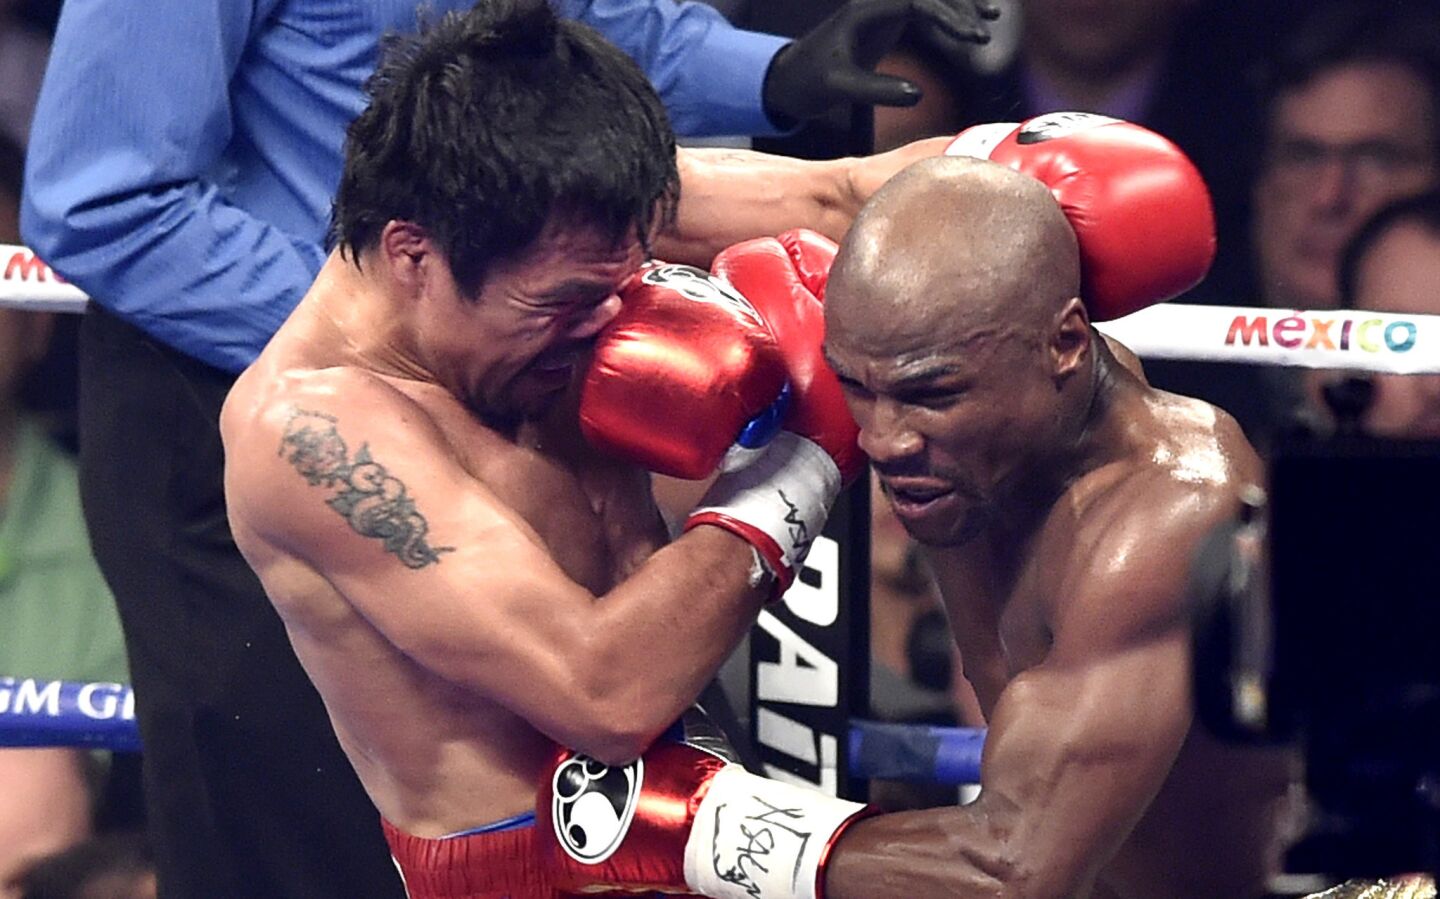 FLoyd Mayweather Jr. lands a punch to Manny Pacquaio in the fourth round Saturday in Las Vegas.